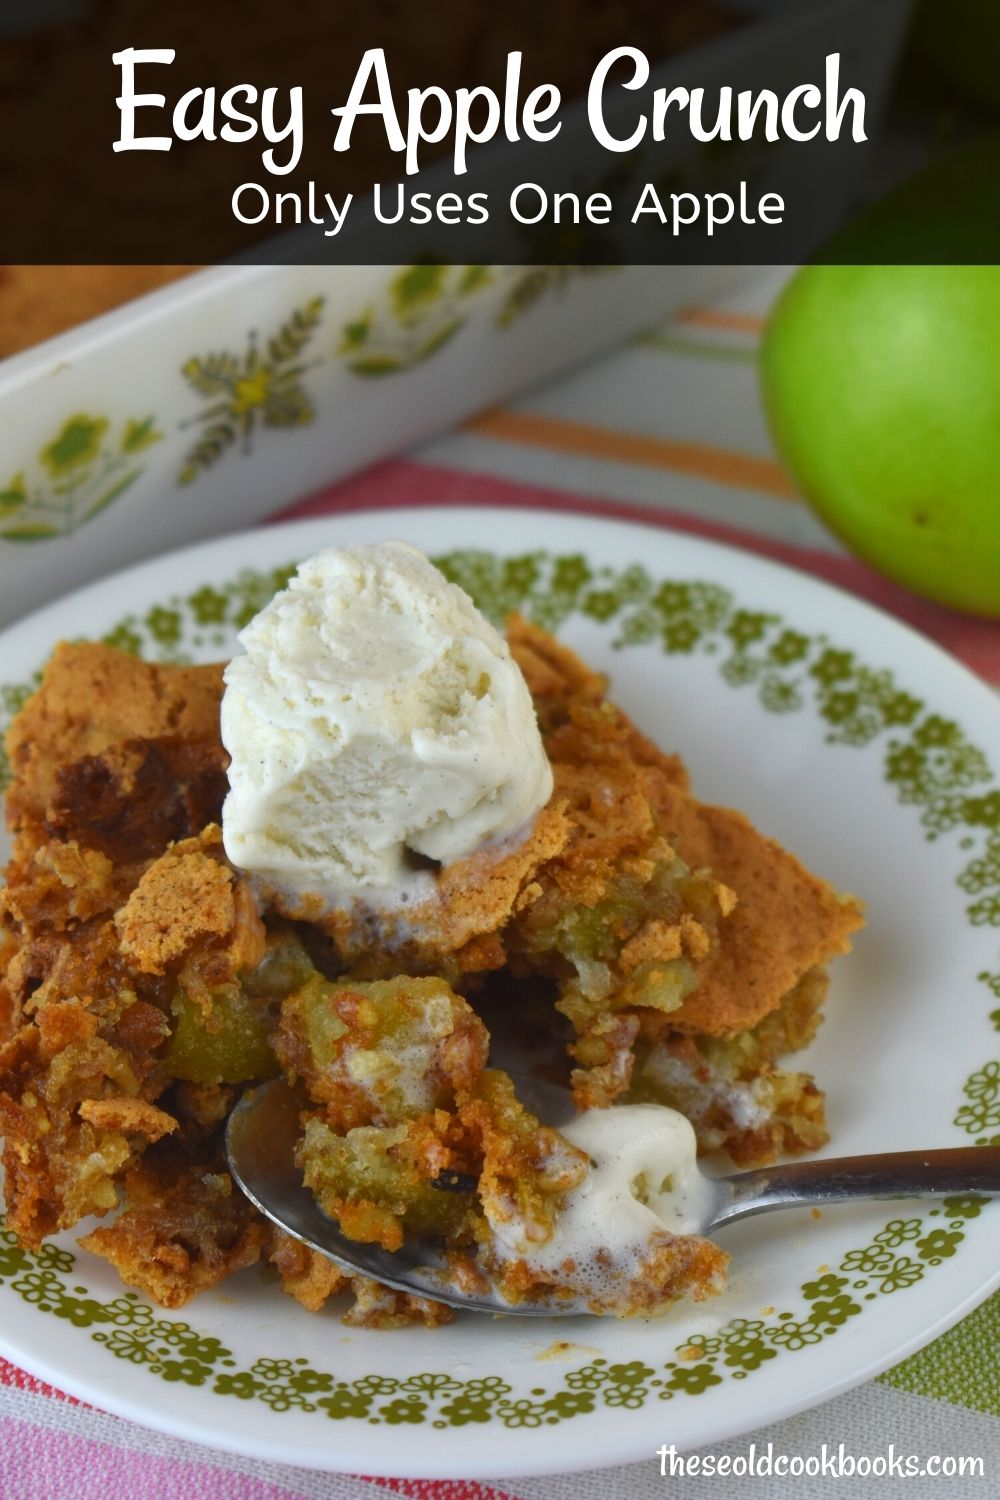 Apple Nut Crunch is the perfect fall dessert when you are short on time and ingredients---it only uses one medium apple. This crunchy baked apple dessert is served warm topped with ice cream or whipped cream.